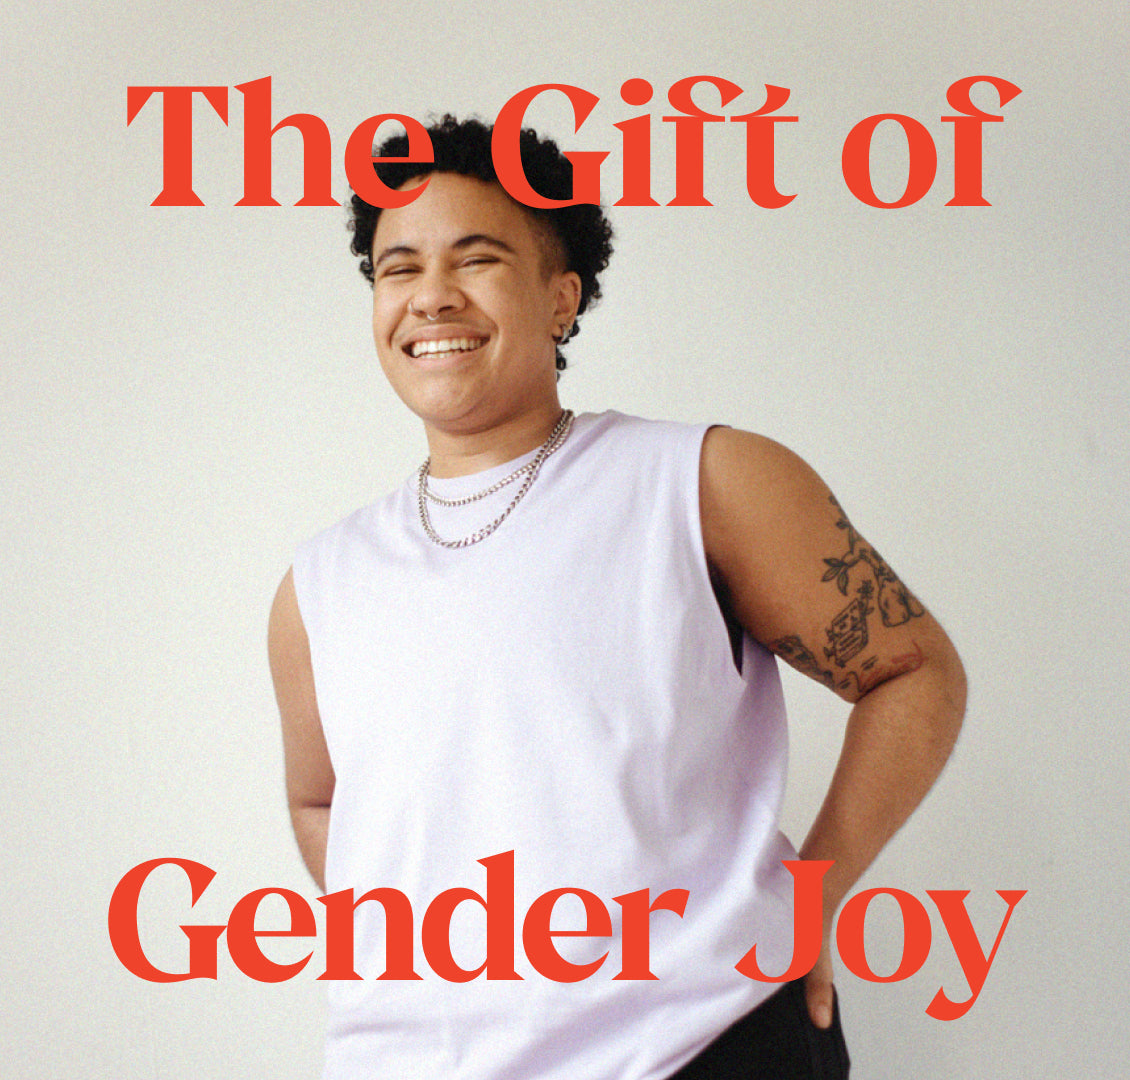 "The Gift of Gender Joy" text with nonbinary person smiling